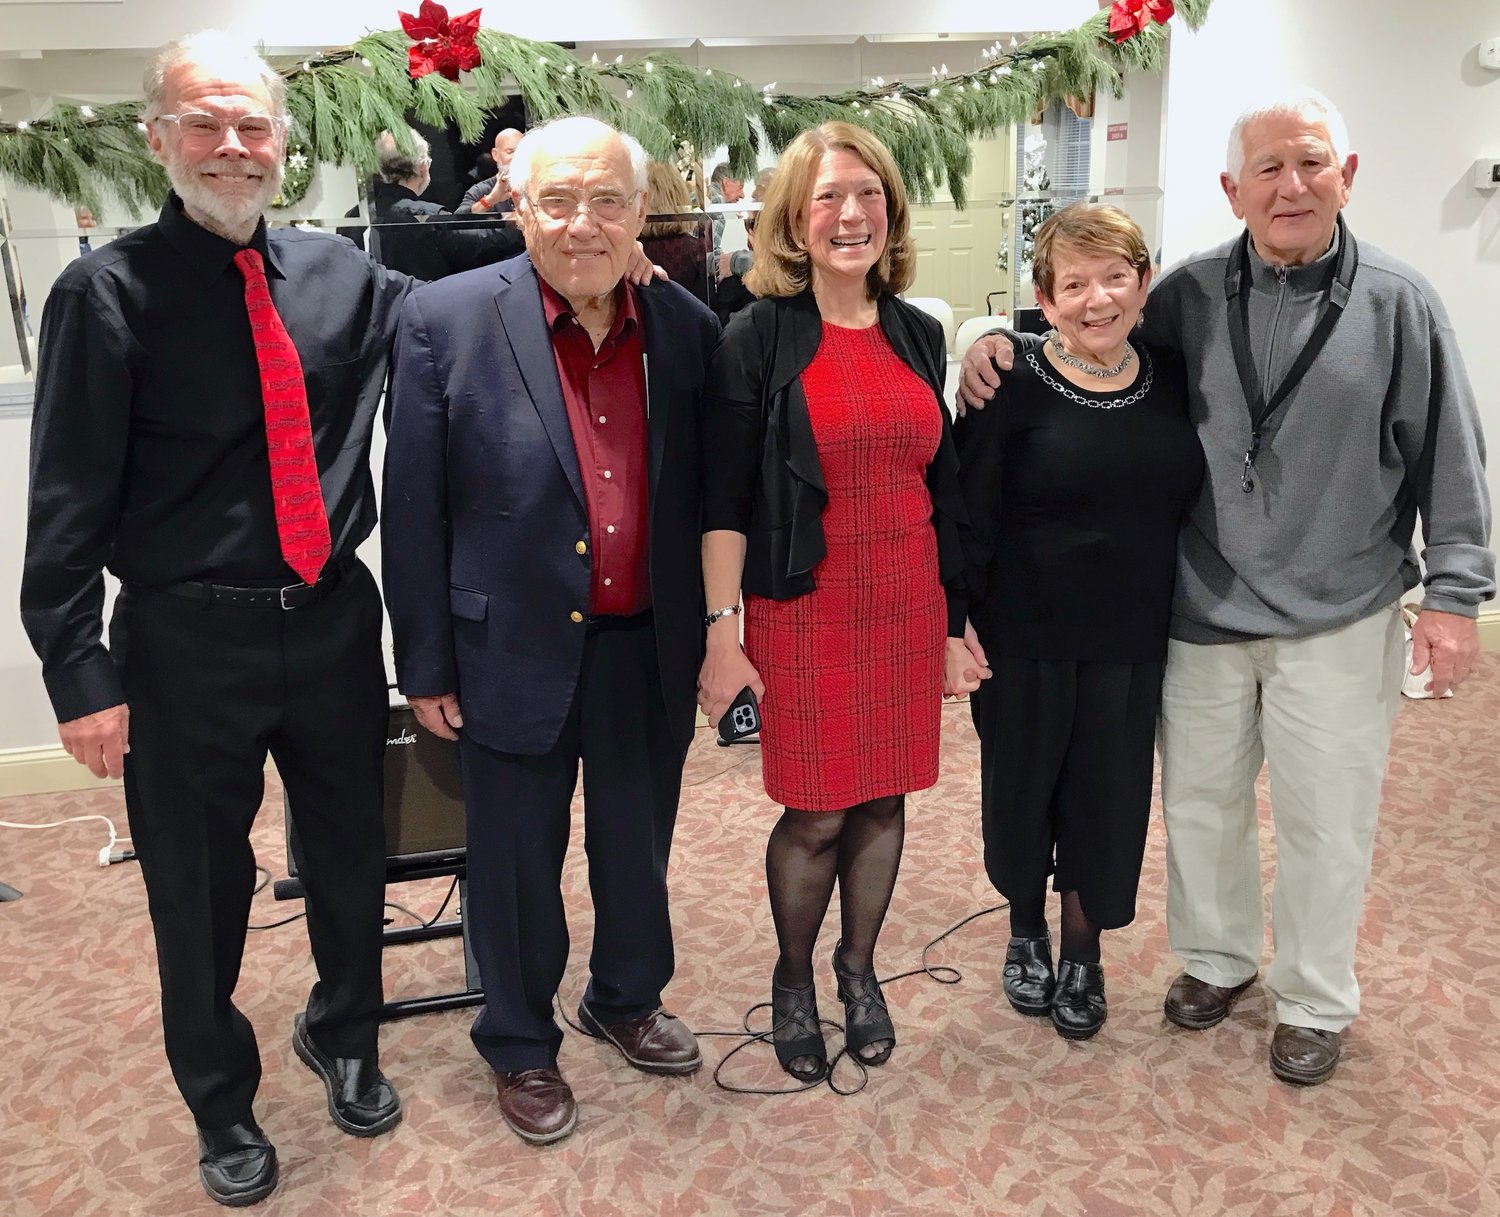 B Sharp Club seniors entertainers pose for a photo following a recent gig at Sunset Wood Apartments in New Hartford. From left, Ted Lenio, Peter Costianes, Gail Brett, Jo Ann Geller, and Pete Ruben.